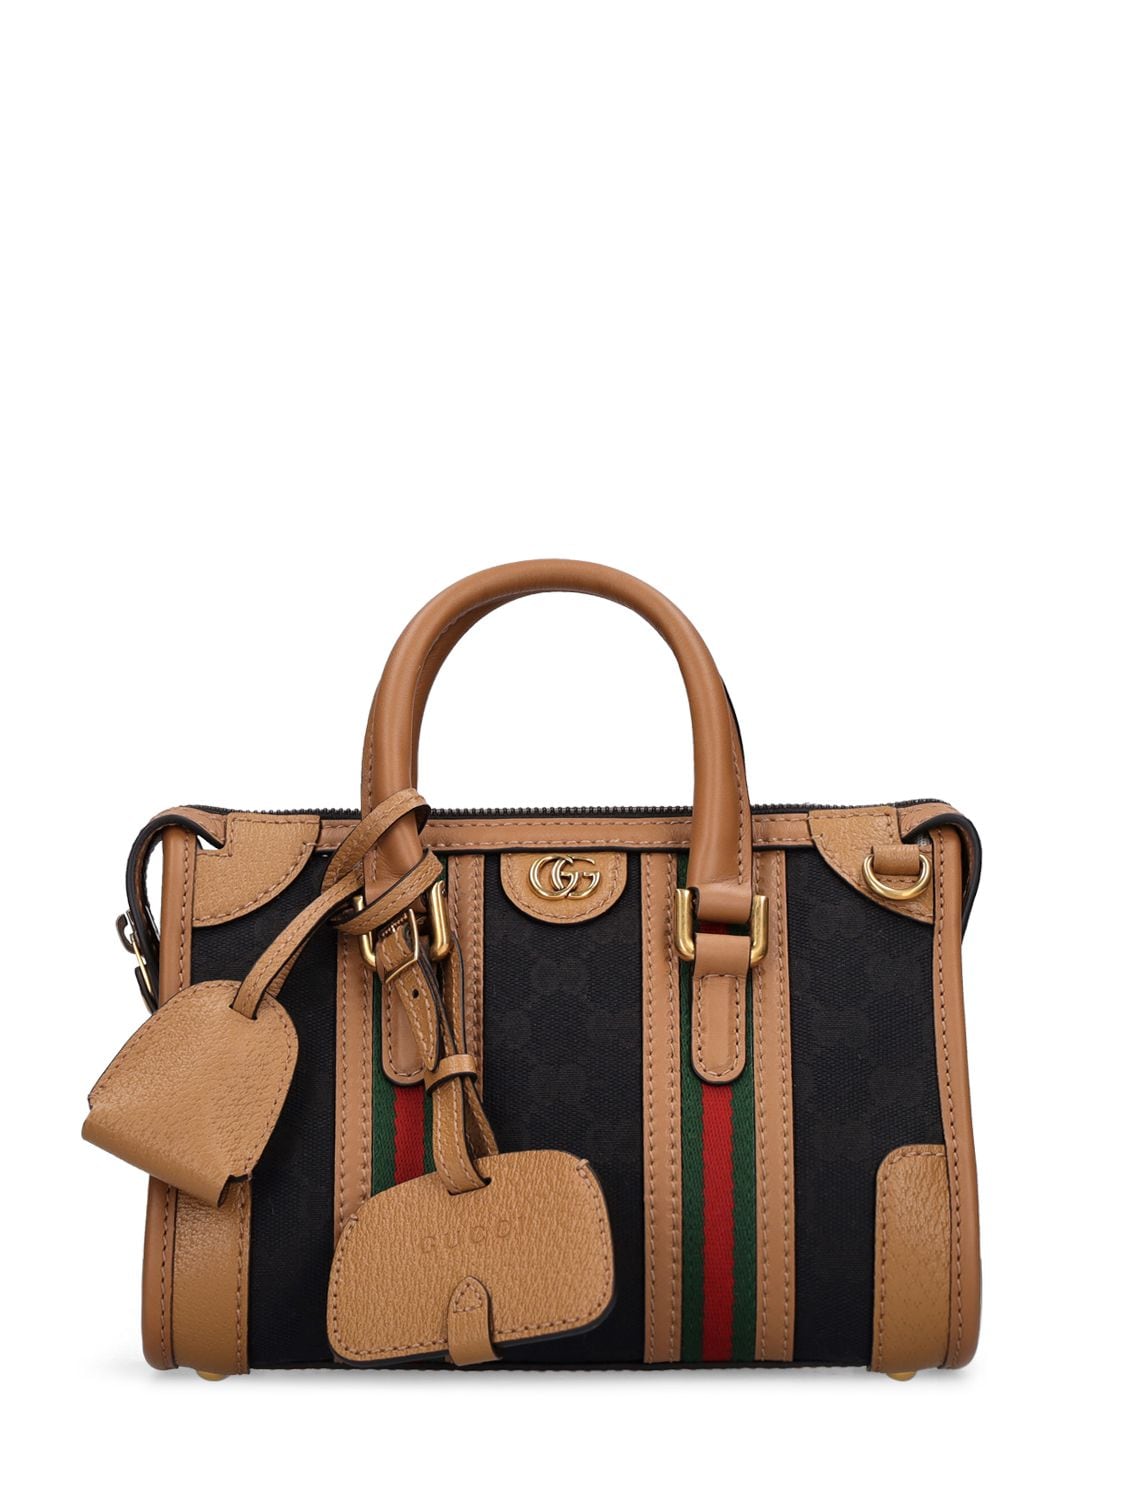 GUCCI Small Bauletto Leather Top Handle Bag